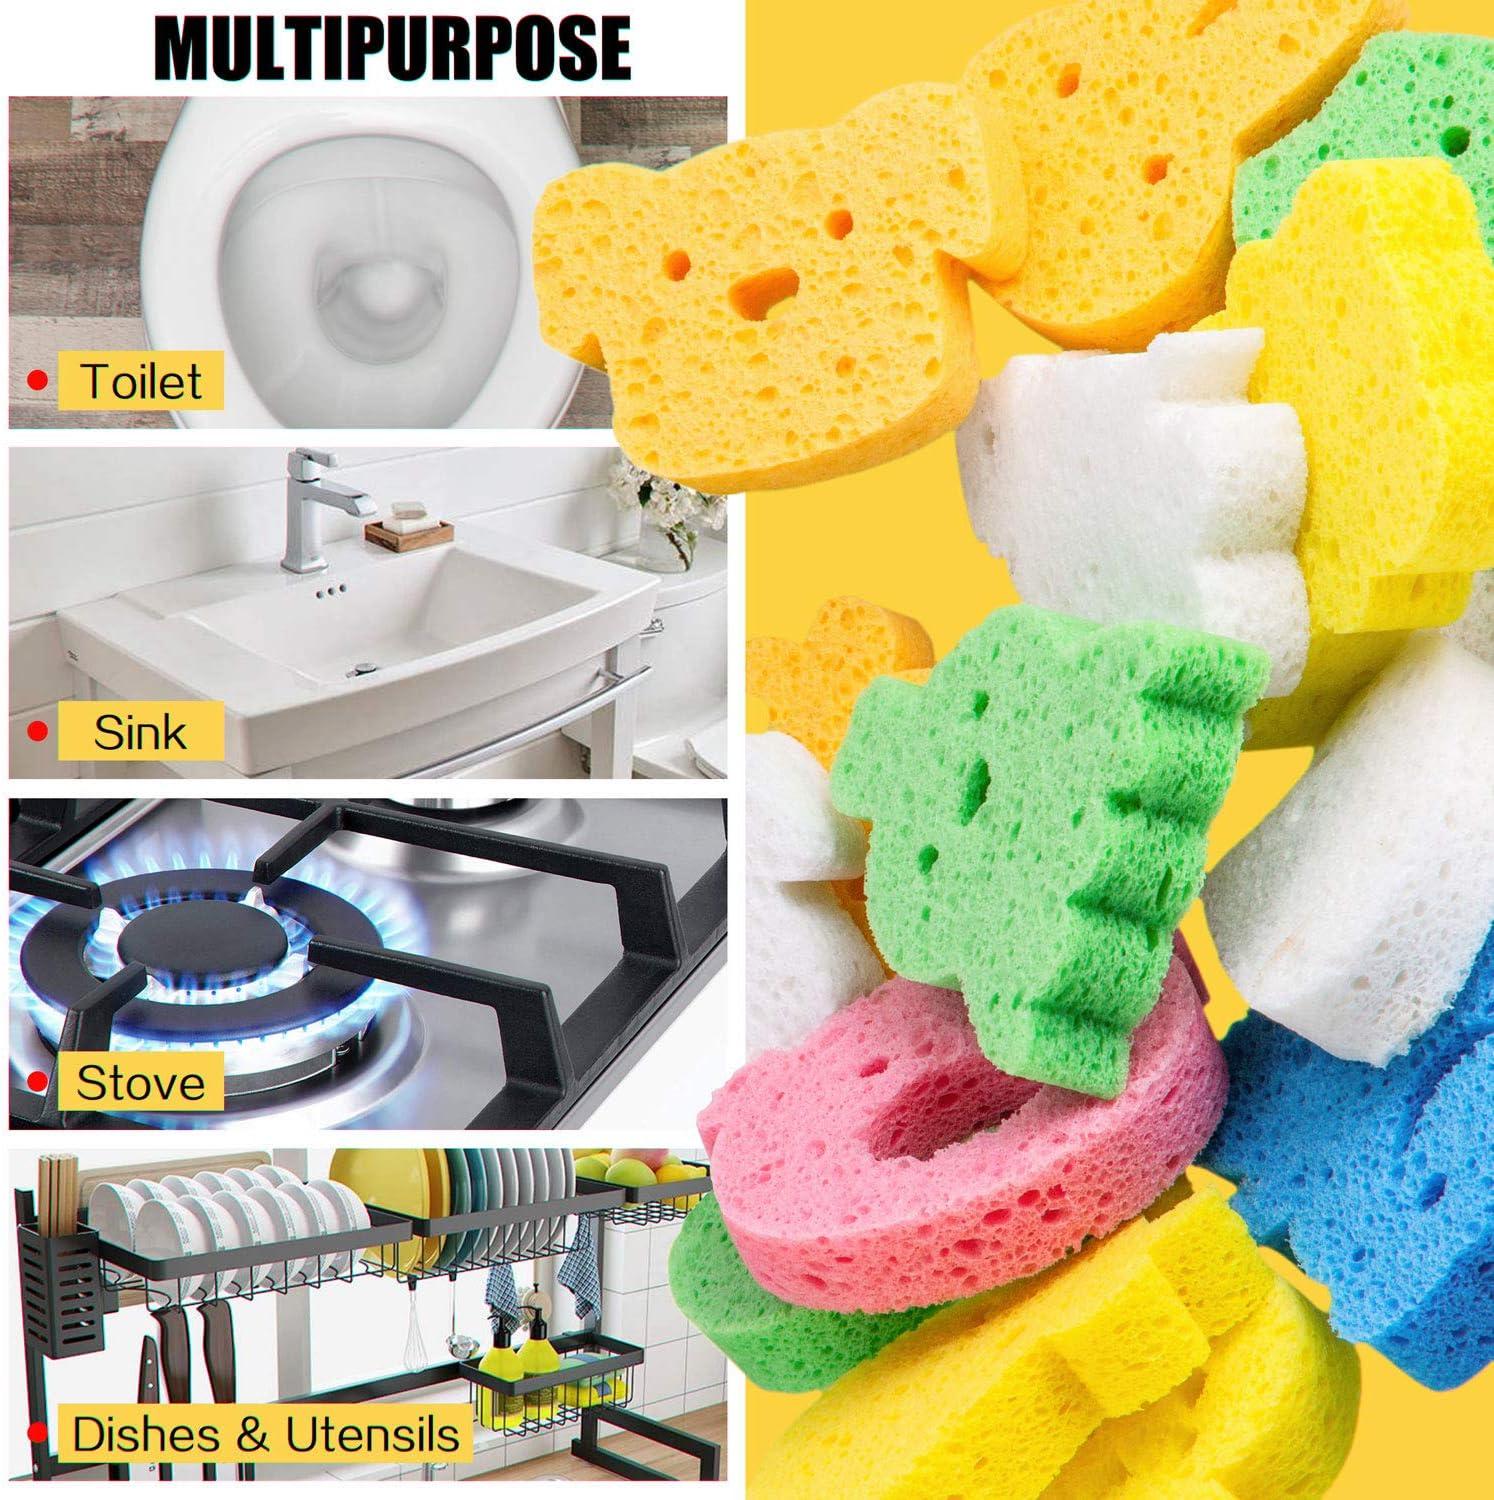 Multi-Use Cellulose Compressed Sponges, Scratch-Free Cleaning Scrub Sponges  for Face Scrub, Dishwashing, Kitchen, Bathroom, DIY Crafts and More (3